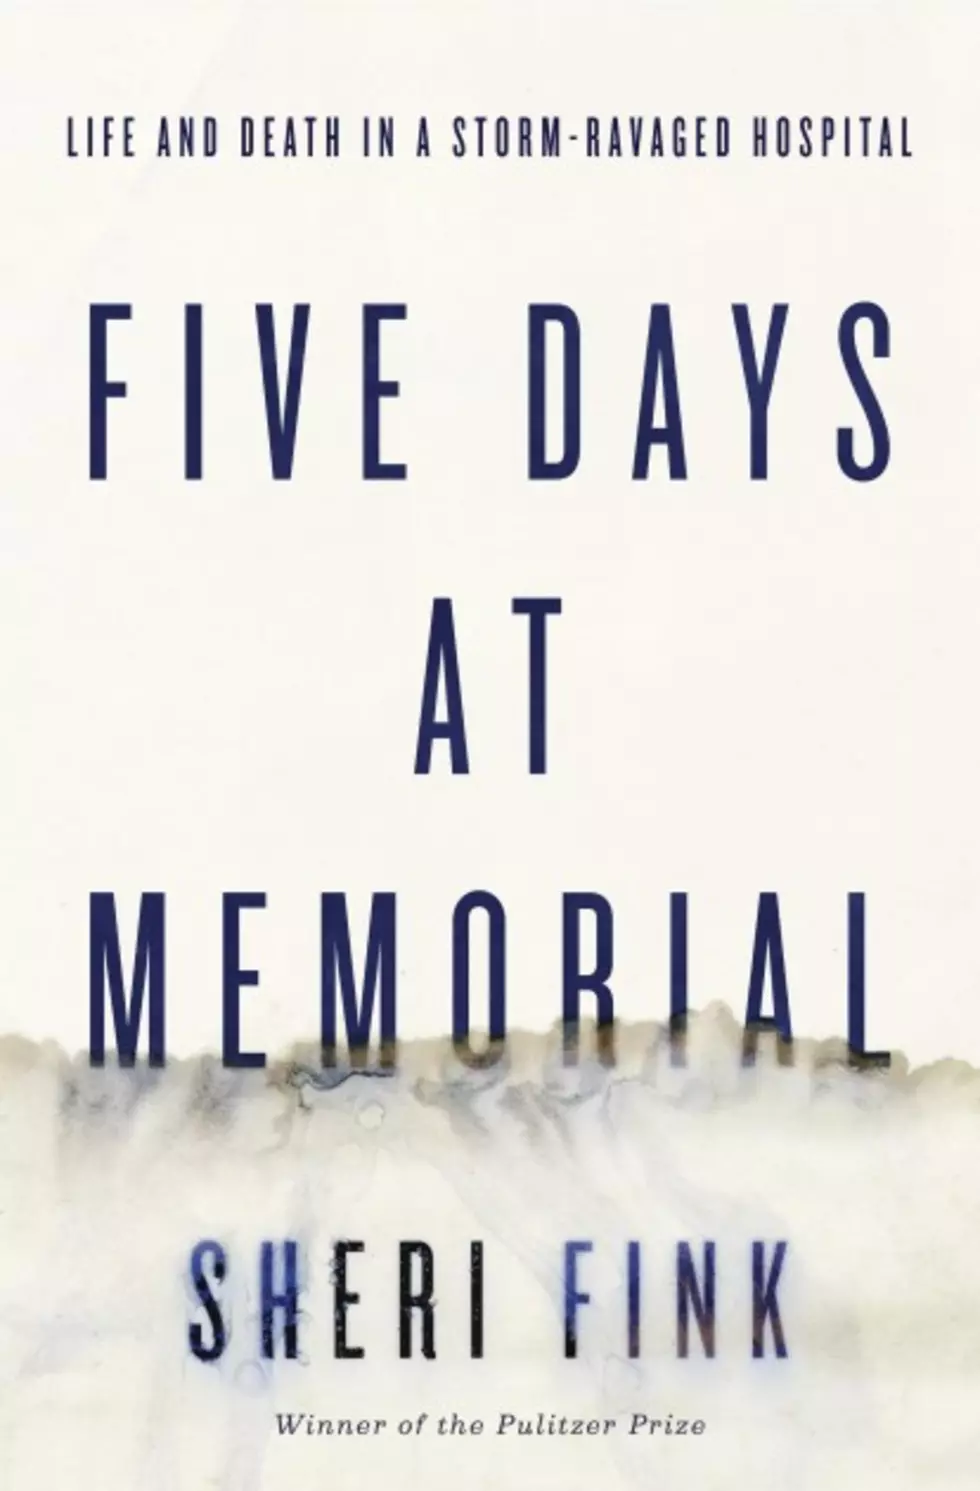 A Big Chuck Book Review:  &#8220;Five Days at Memorial&#8221; Is Unforgettable!